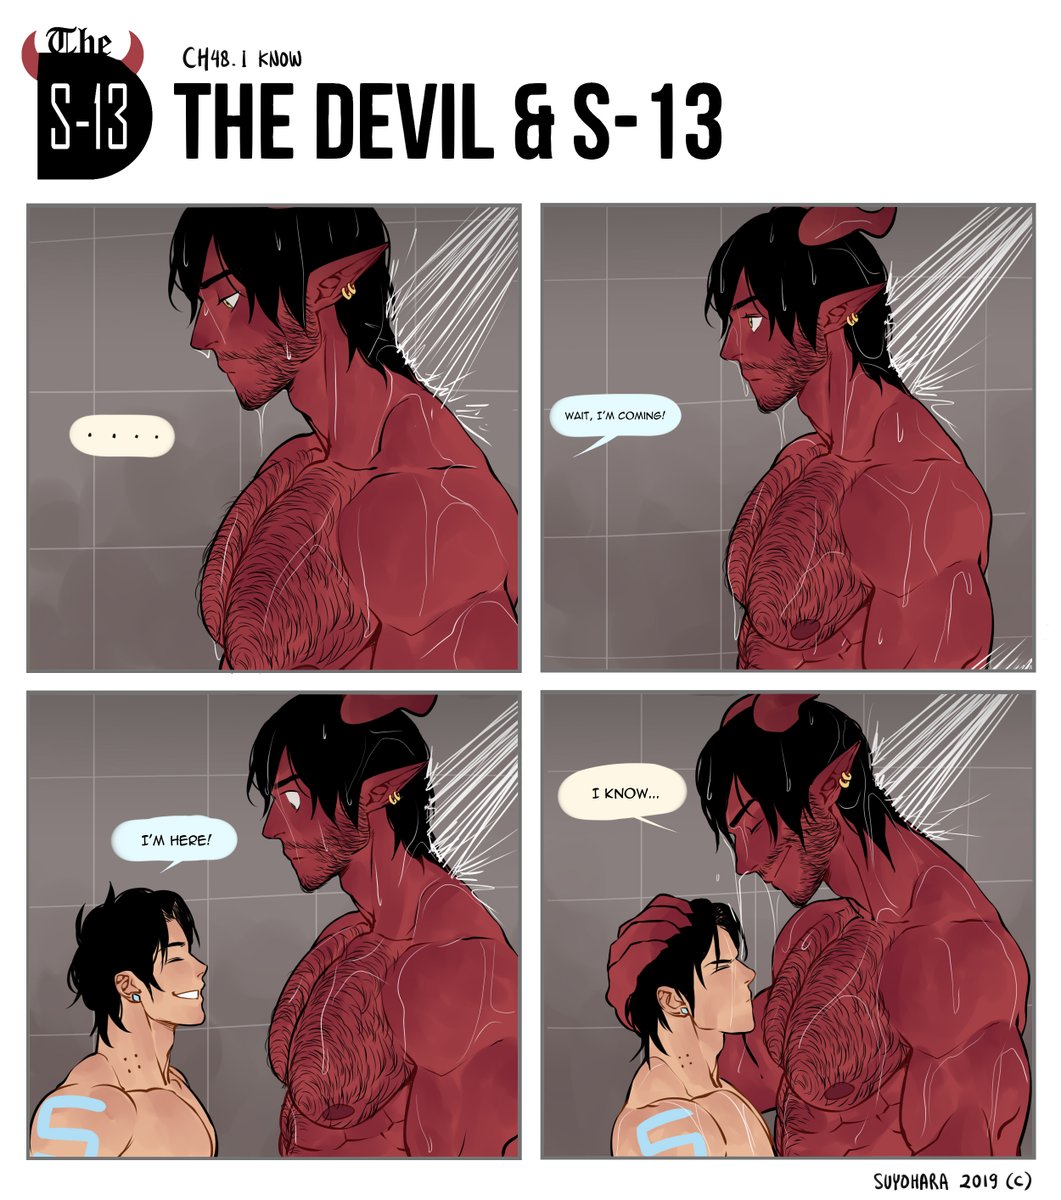 The Devil and S-13.